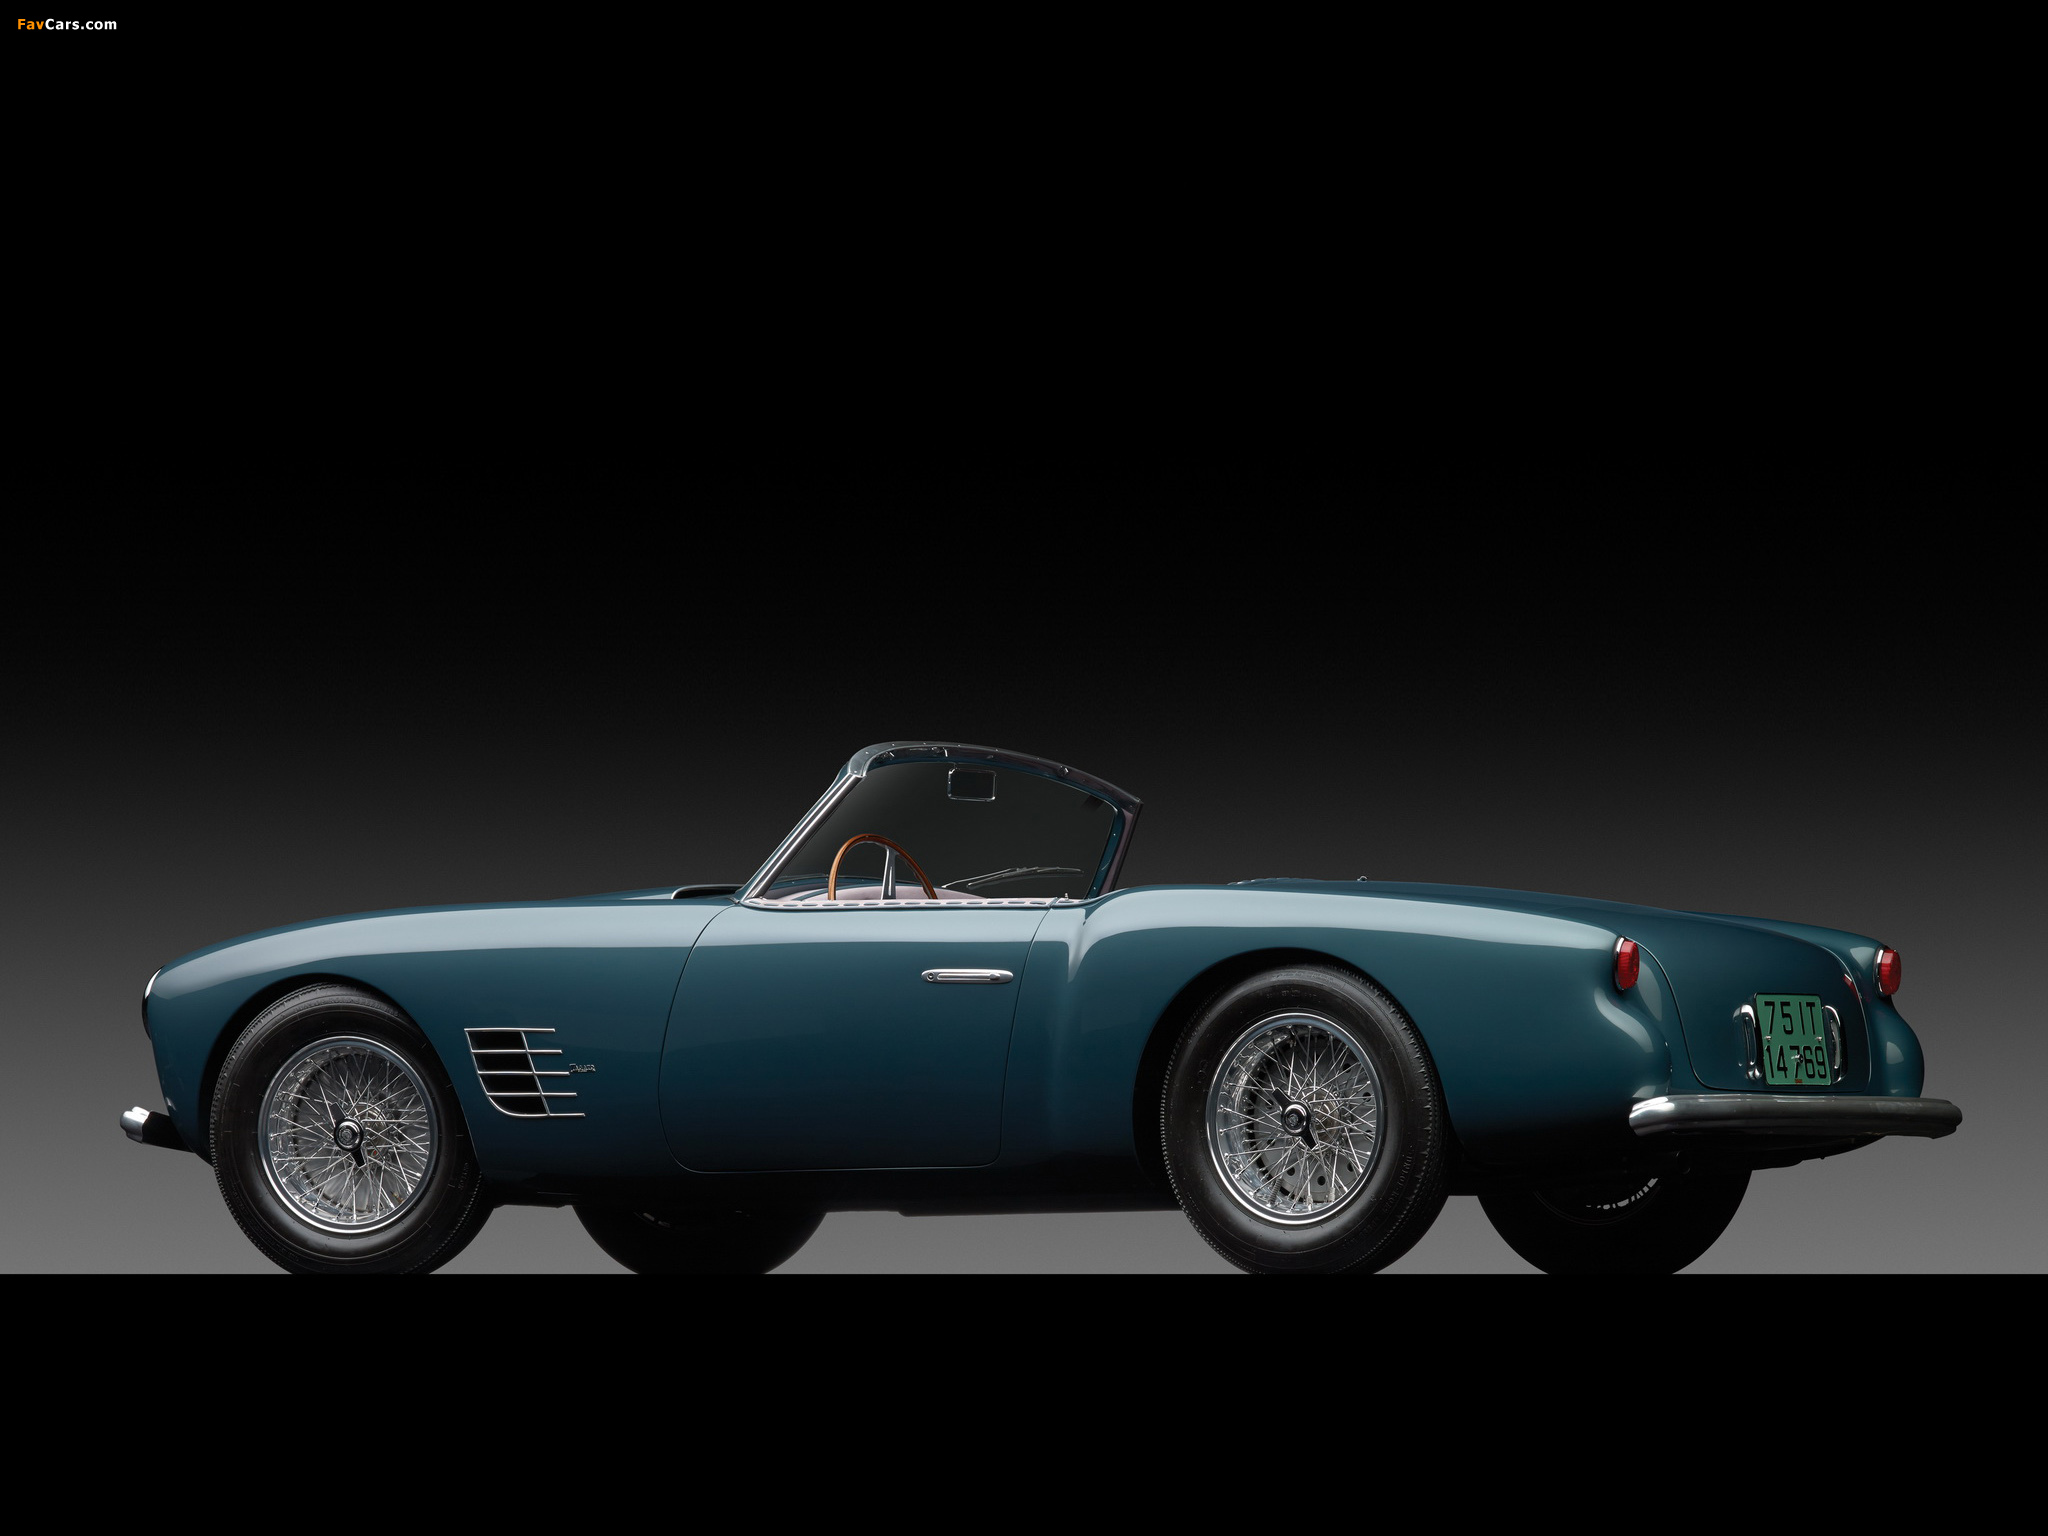 Pictures of Maserati A6G 2000 Spider 1954 (2048 x 1536)